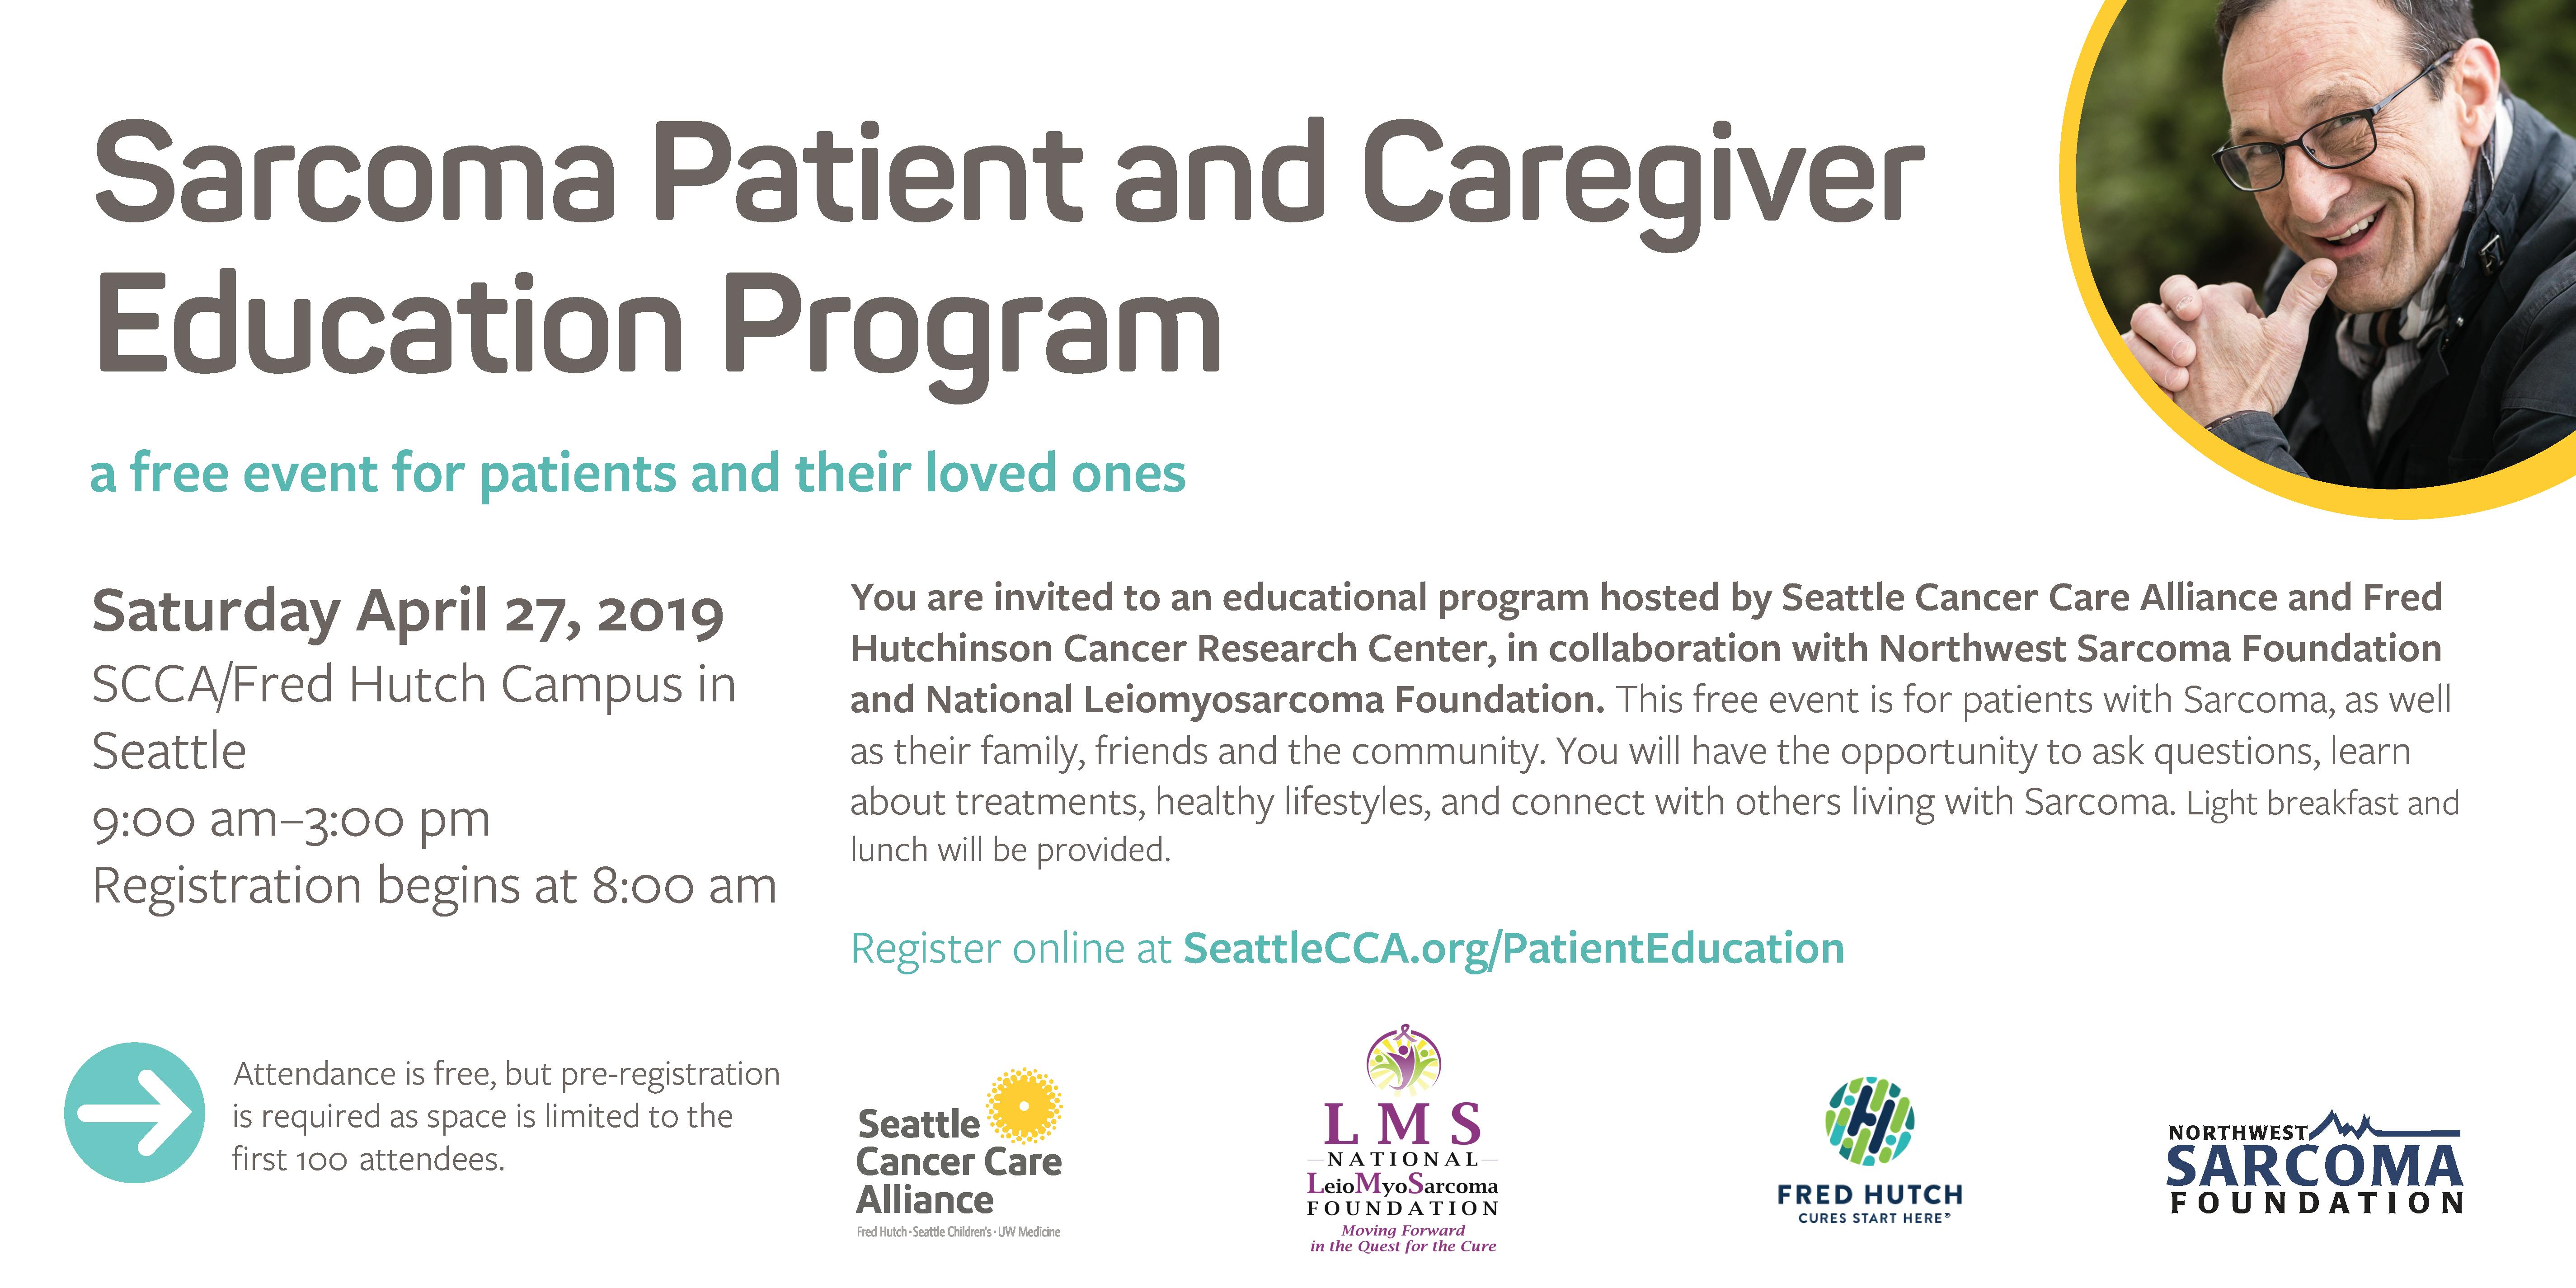 Sarcoma Patient and Caregiver Education Program for patients and their loved ones